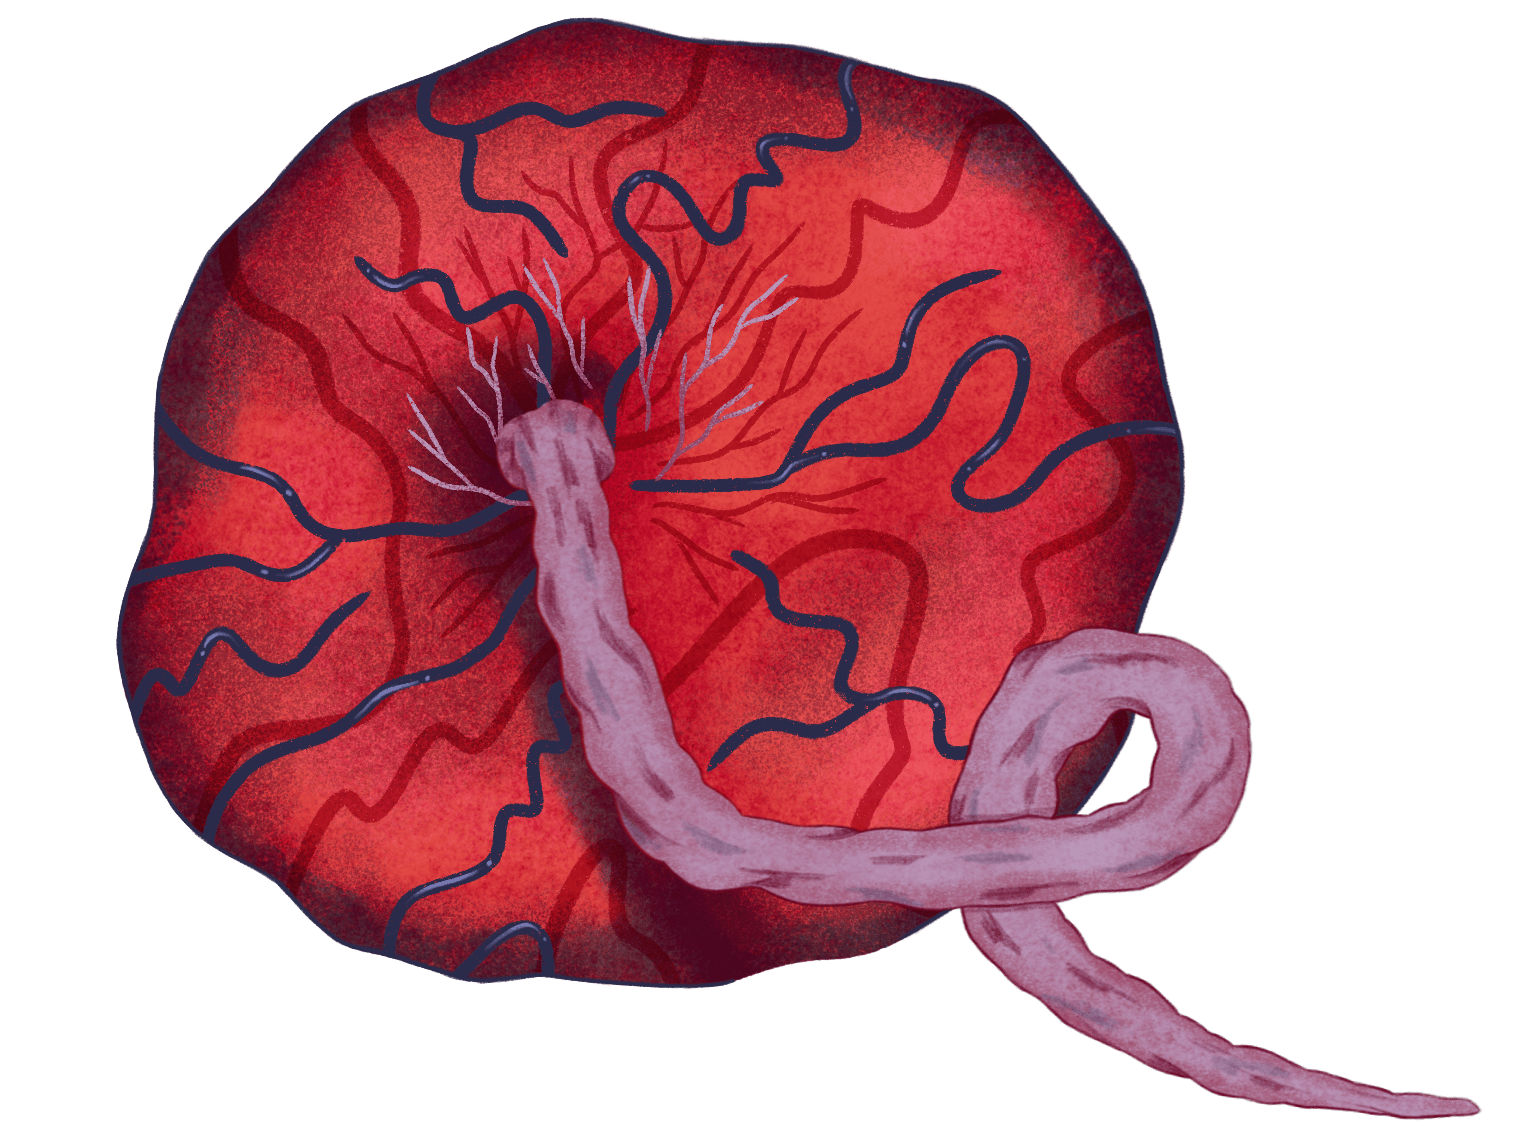 An illustration of a placenta